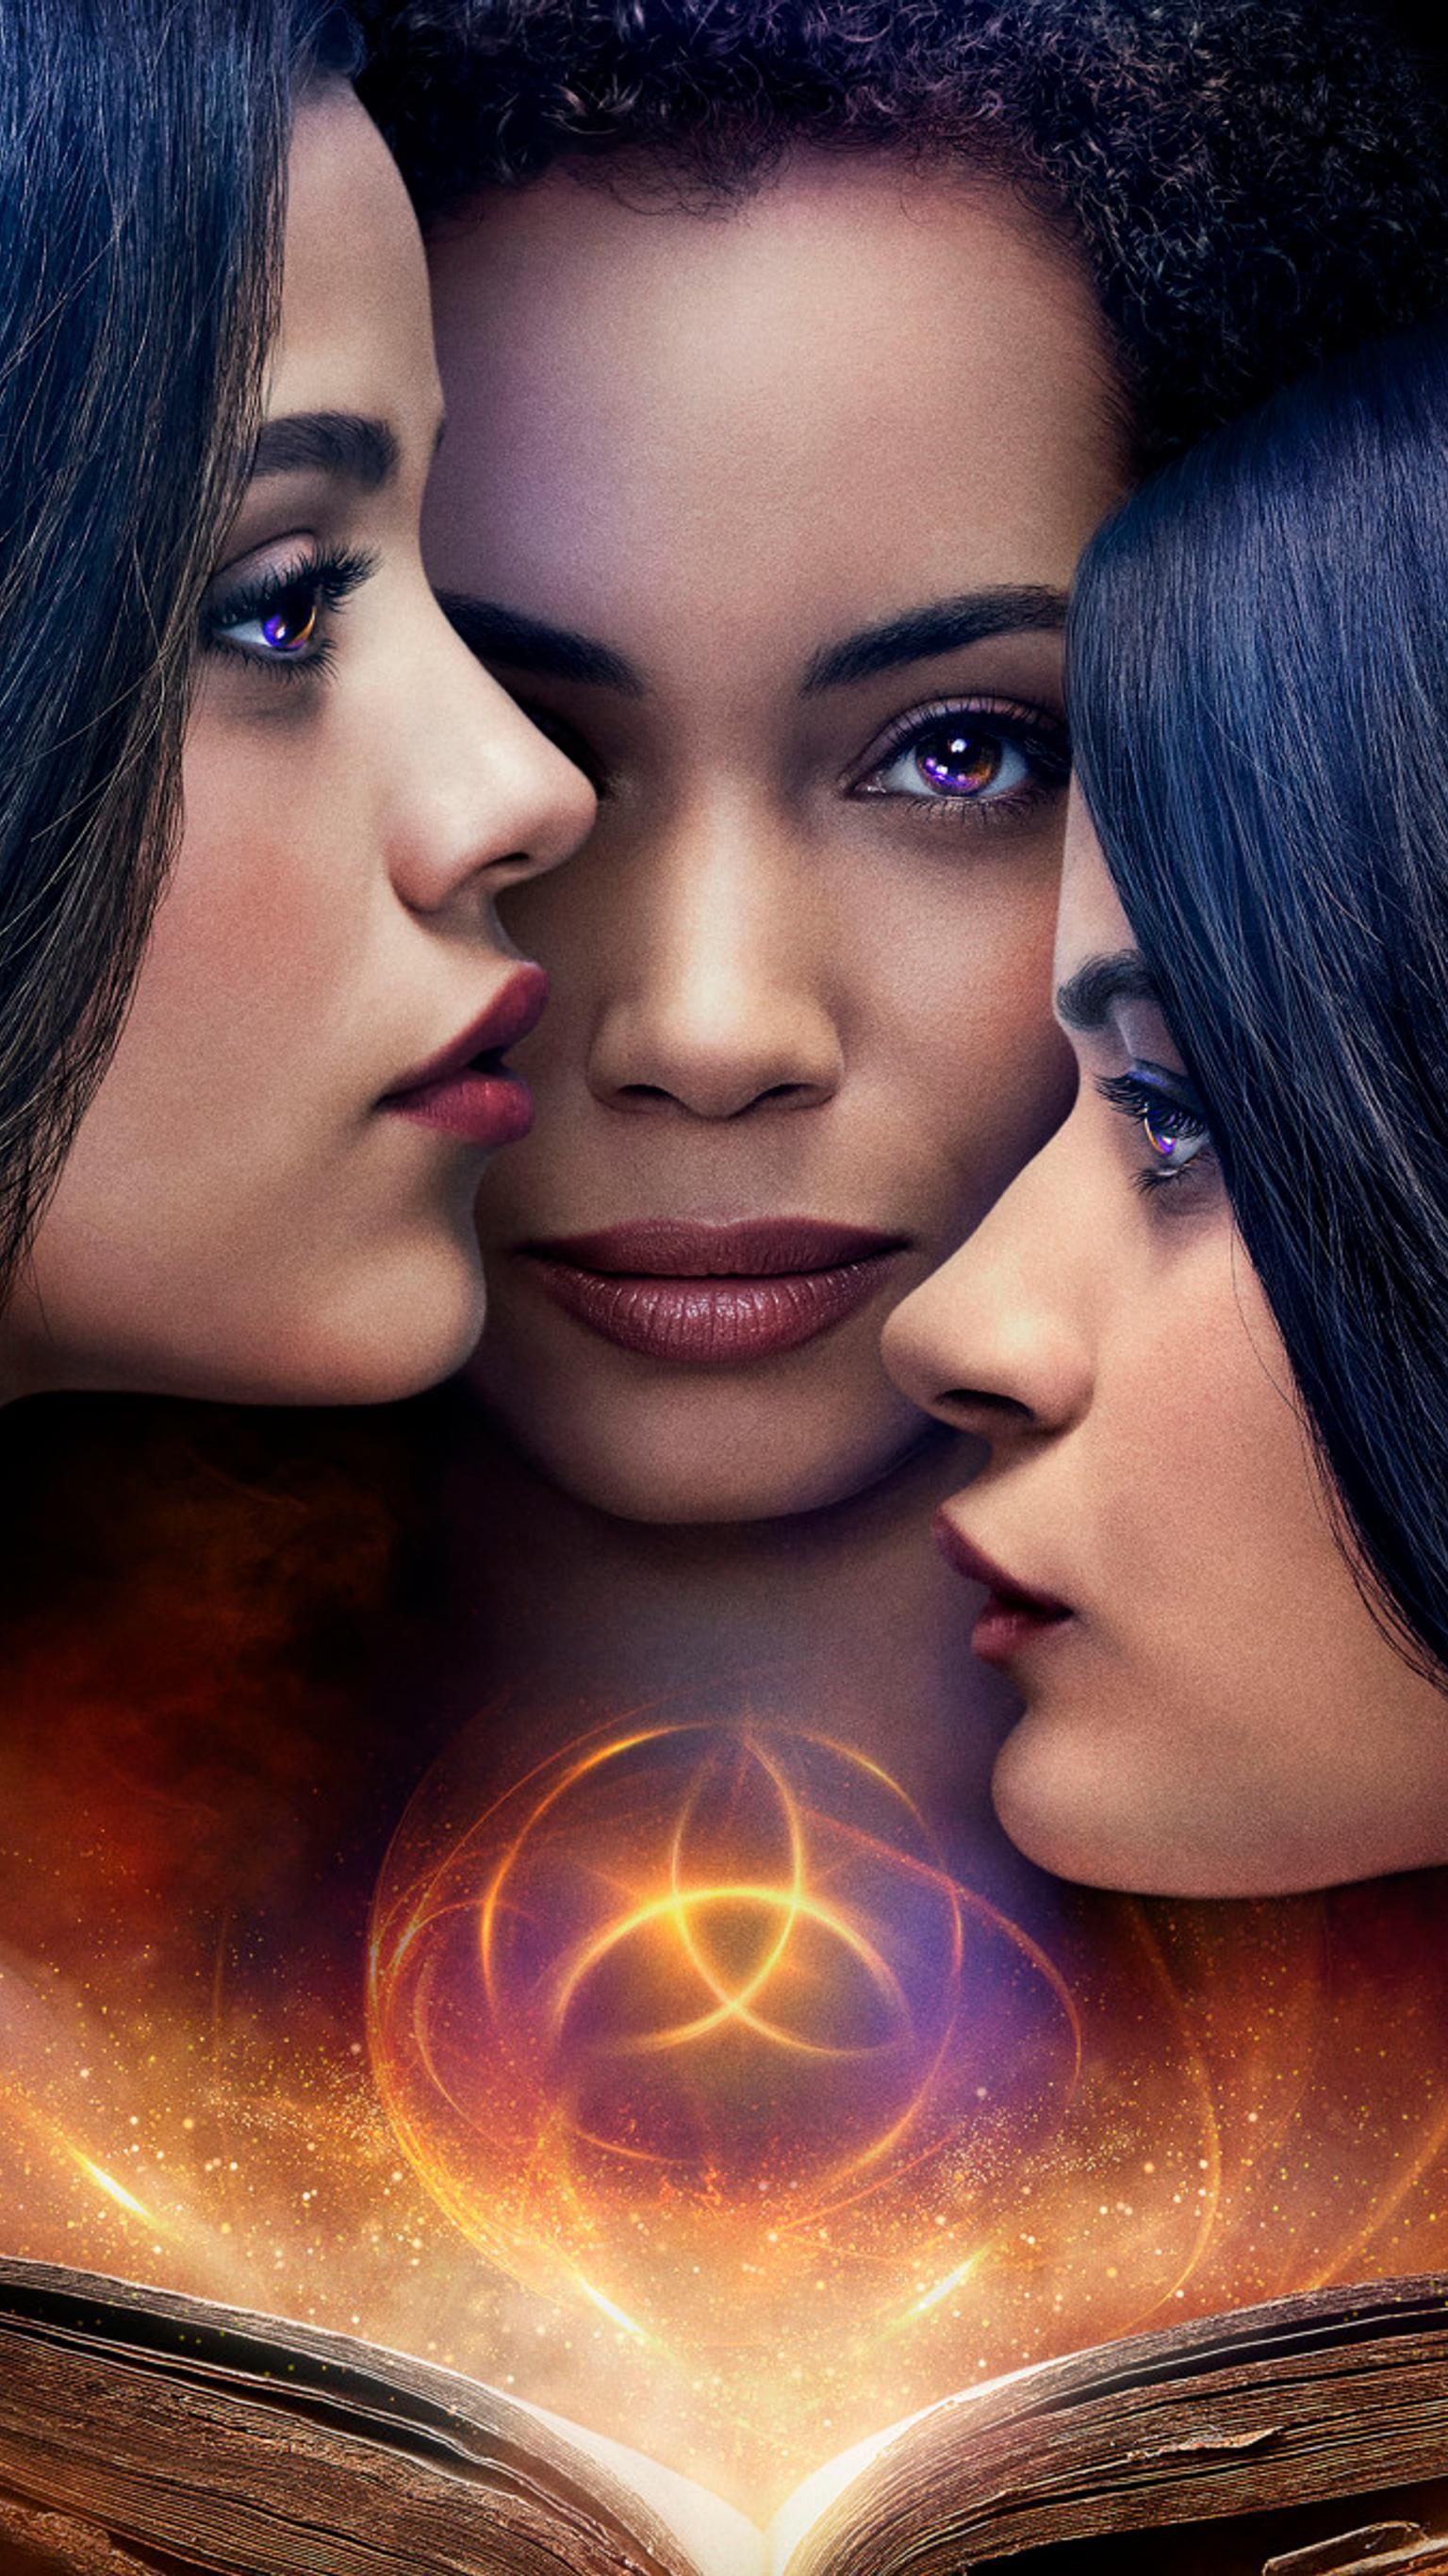 Charmed Phone Wallpaper. Moviemania. Charmed tv, Charmed tv show, Charmed sisters